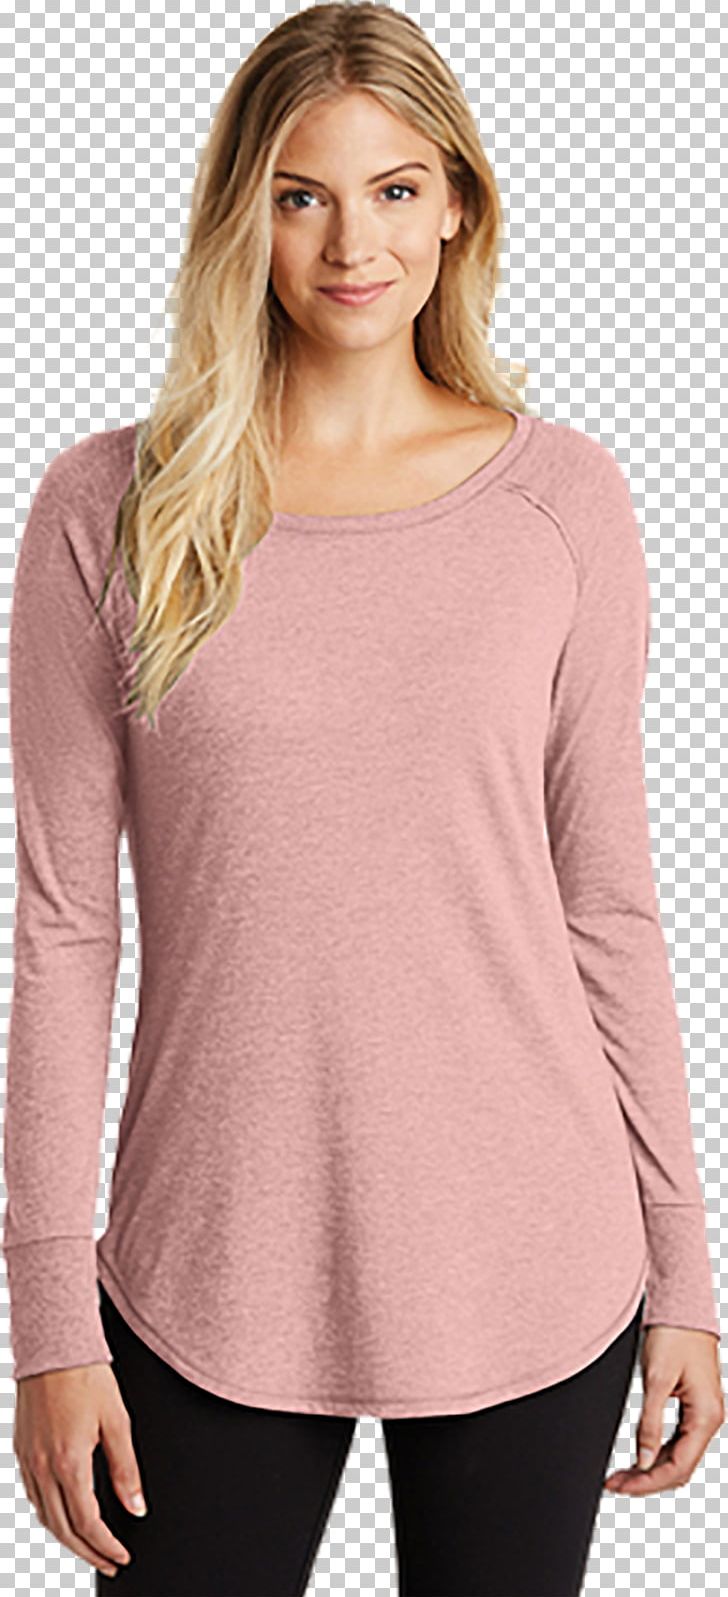 Long-sleeved T-shirt Hoodie Clothing PNG, Clipart, Clothing, Cuff, Day Dress, Fashion, Hoodie Free PNG Download